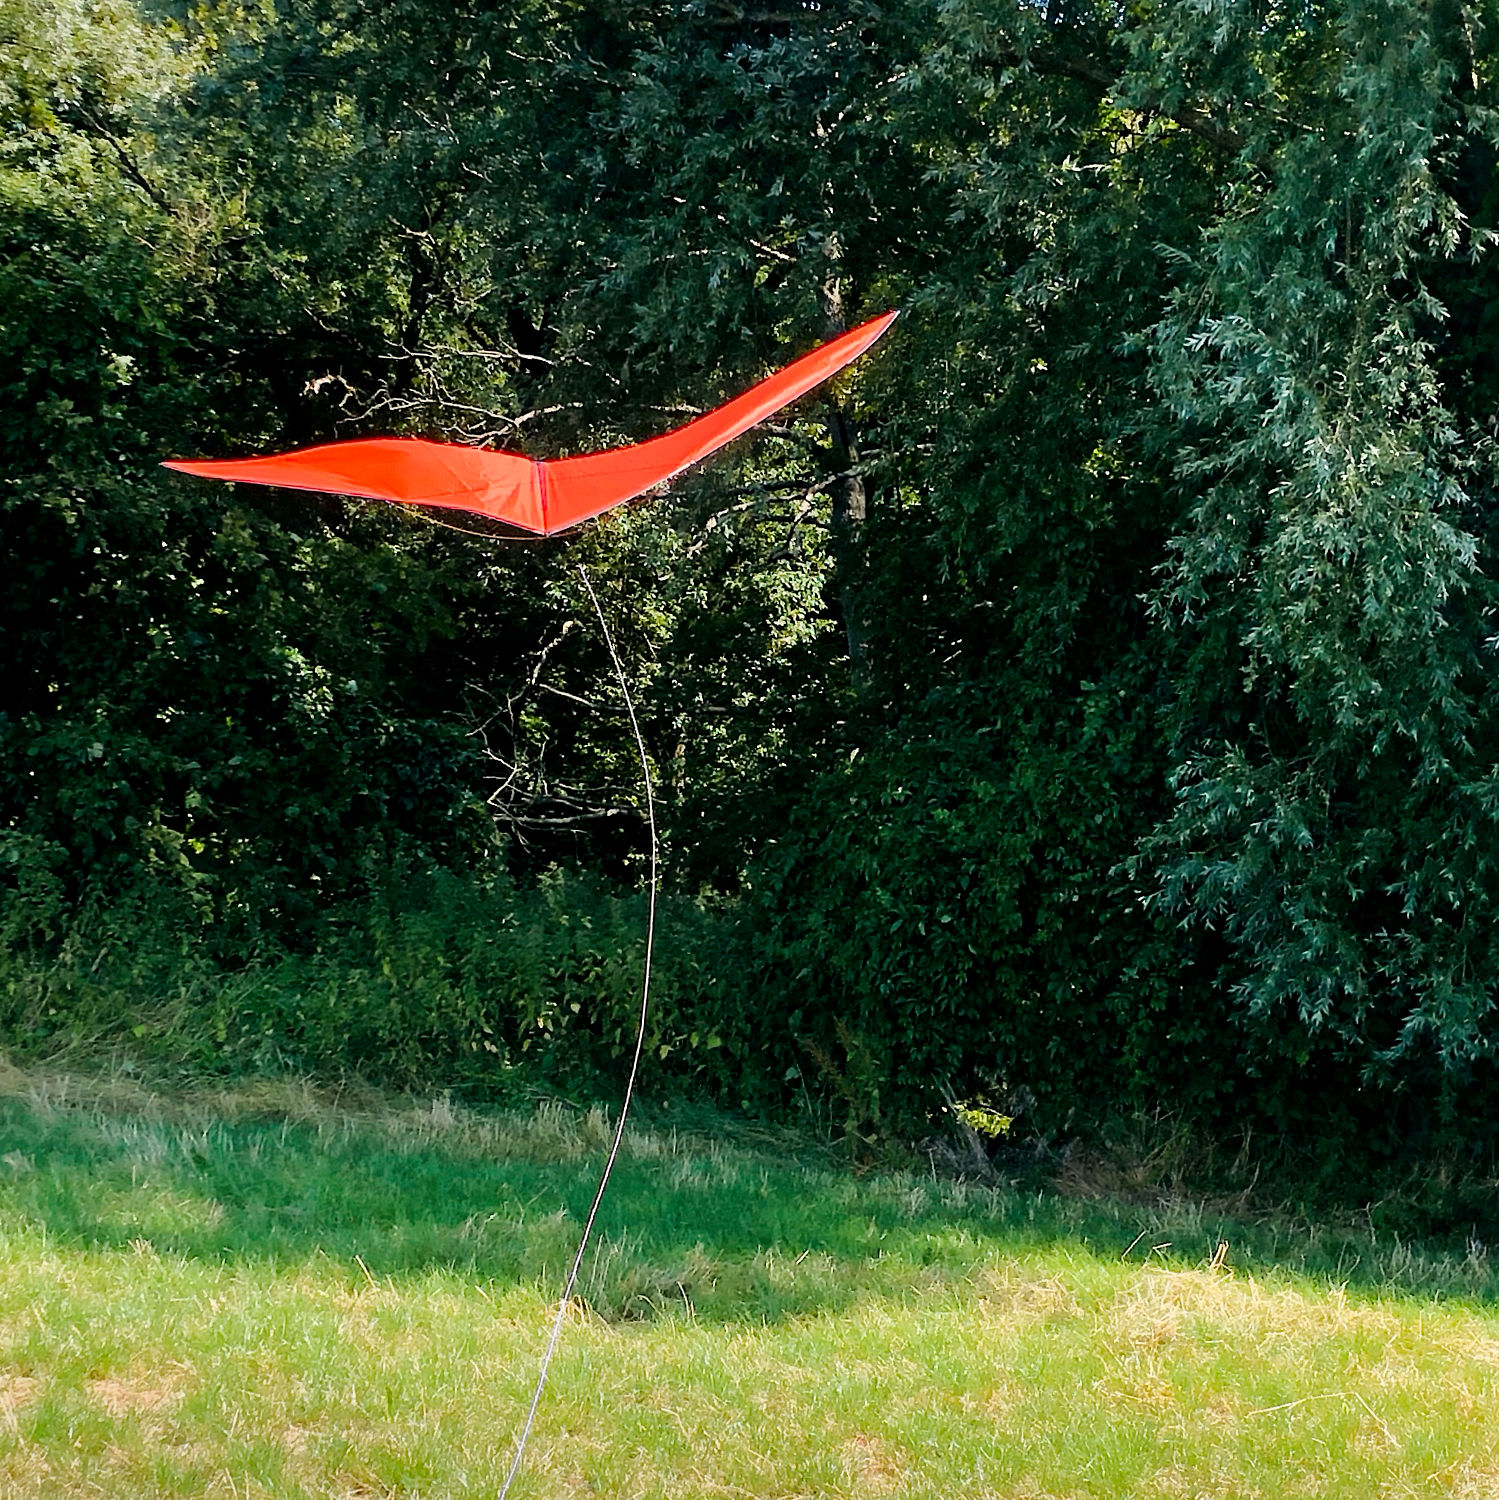 Zero wind kite in front of a forest in the summer heat.